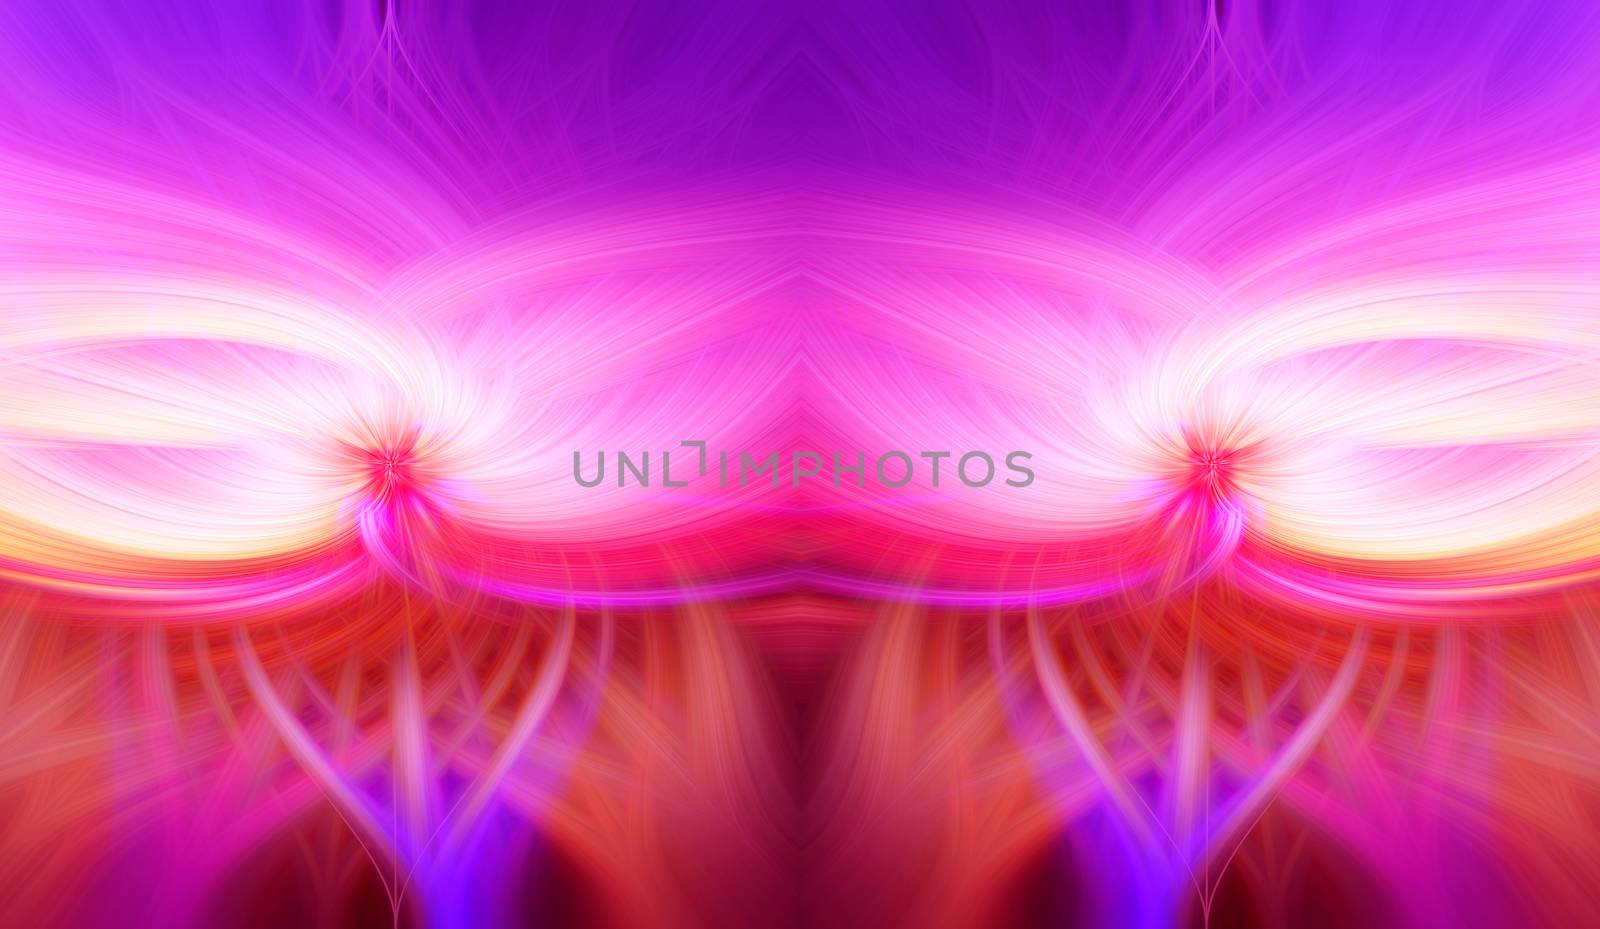 Beautiful abstract intertwined symmetrical 3d fibers forming a shape of sparkle, flame, flower, interlinked hearts. Pink, blue, maroon, yellow, and purple colors. Illustration.